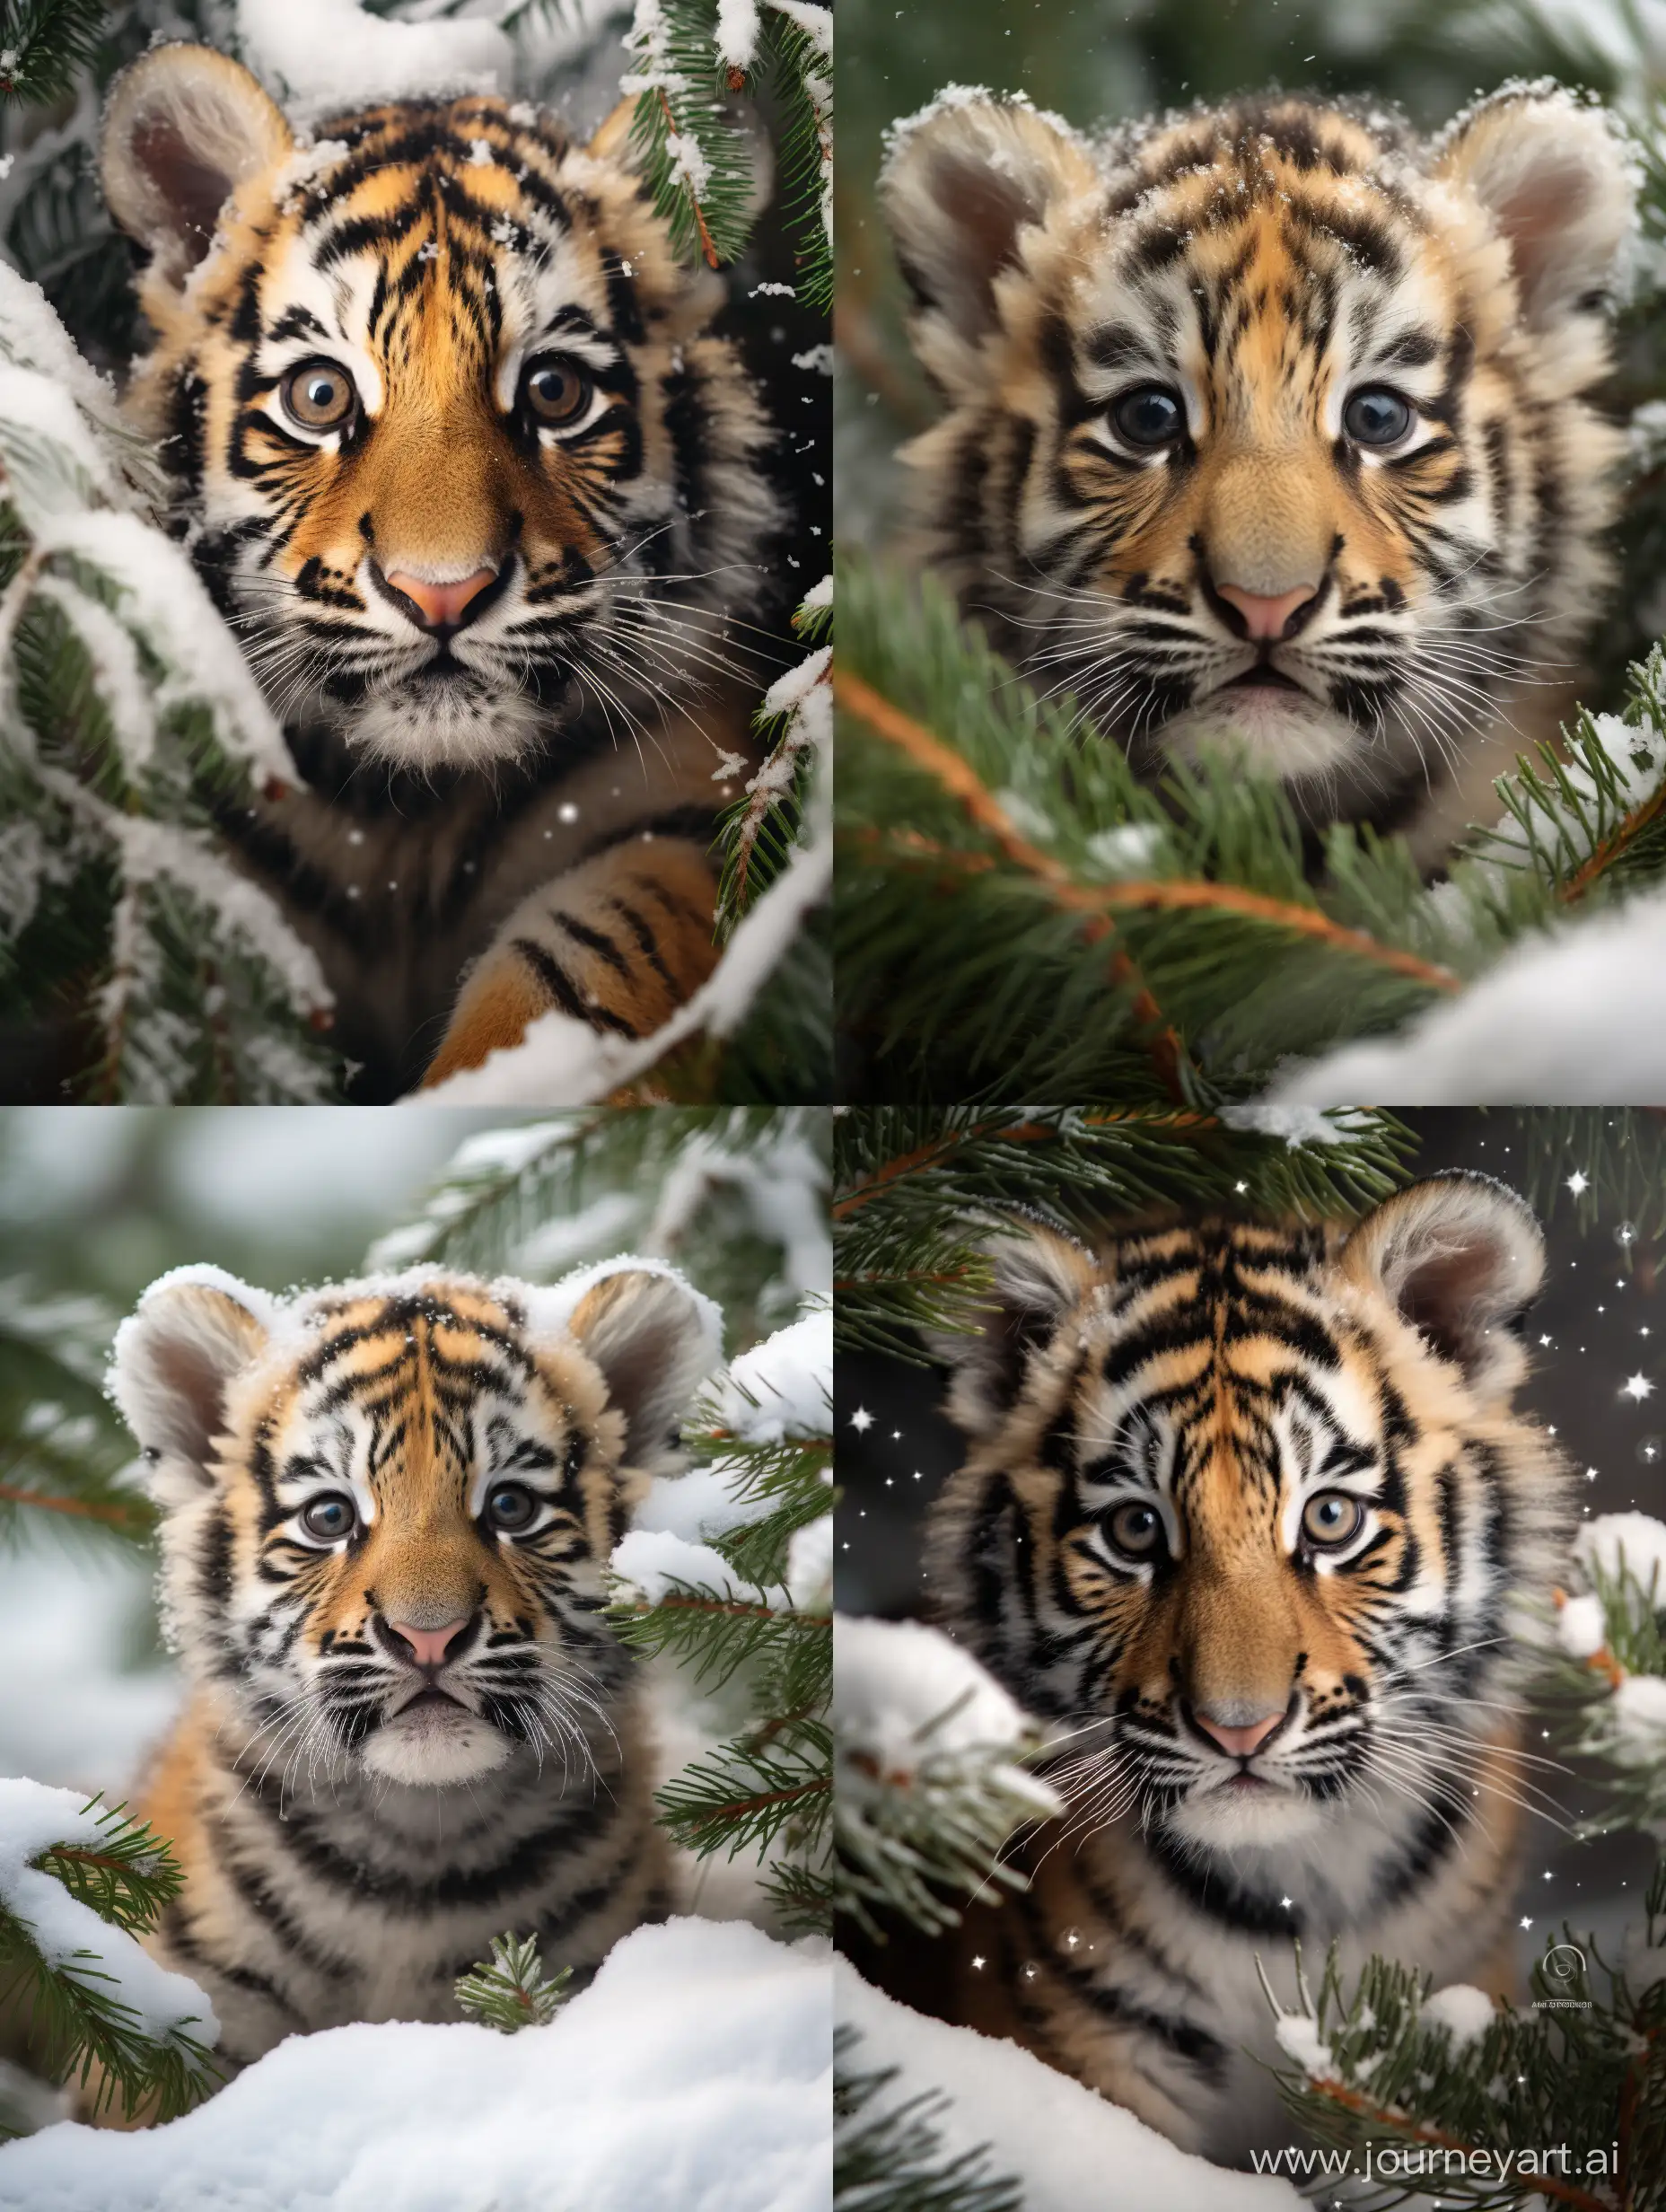 Adorable-Little-Tiger-Cub-Playing-in-Snowy-New-Years-Scene